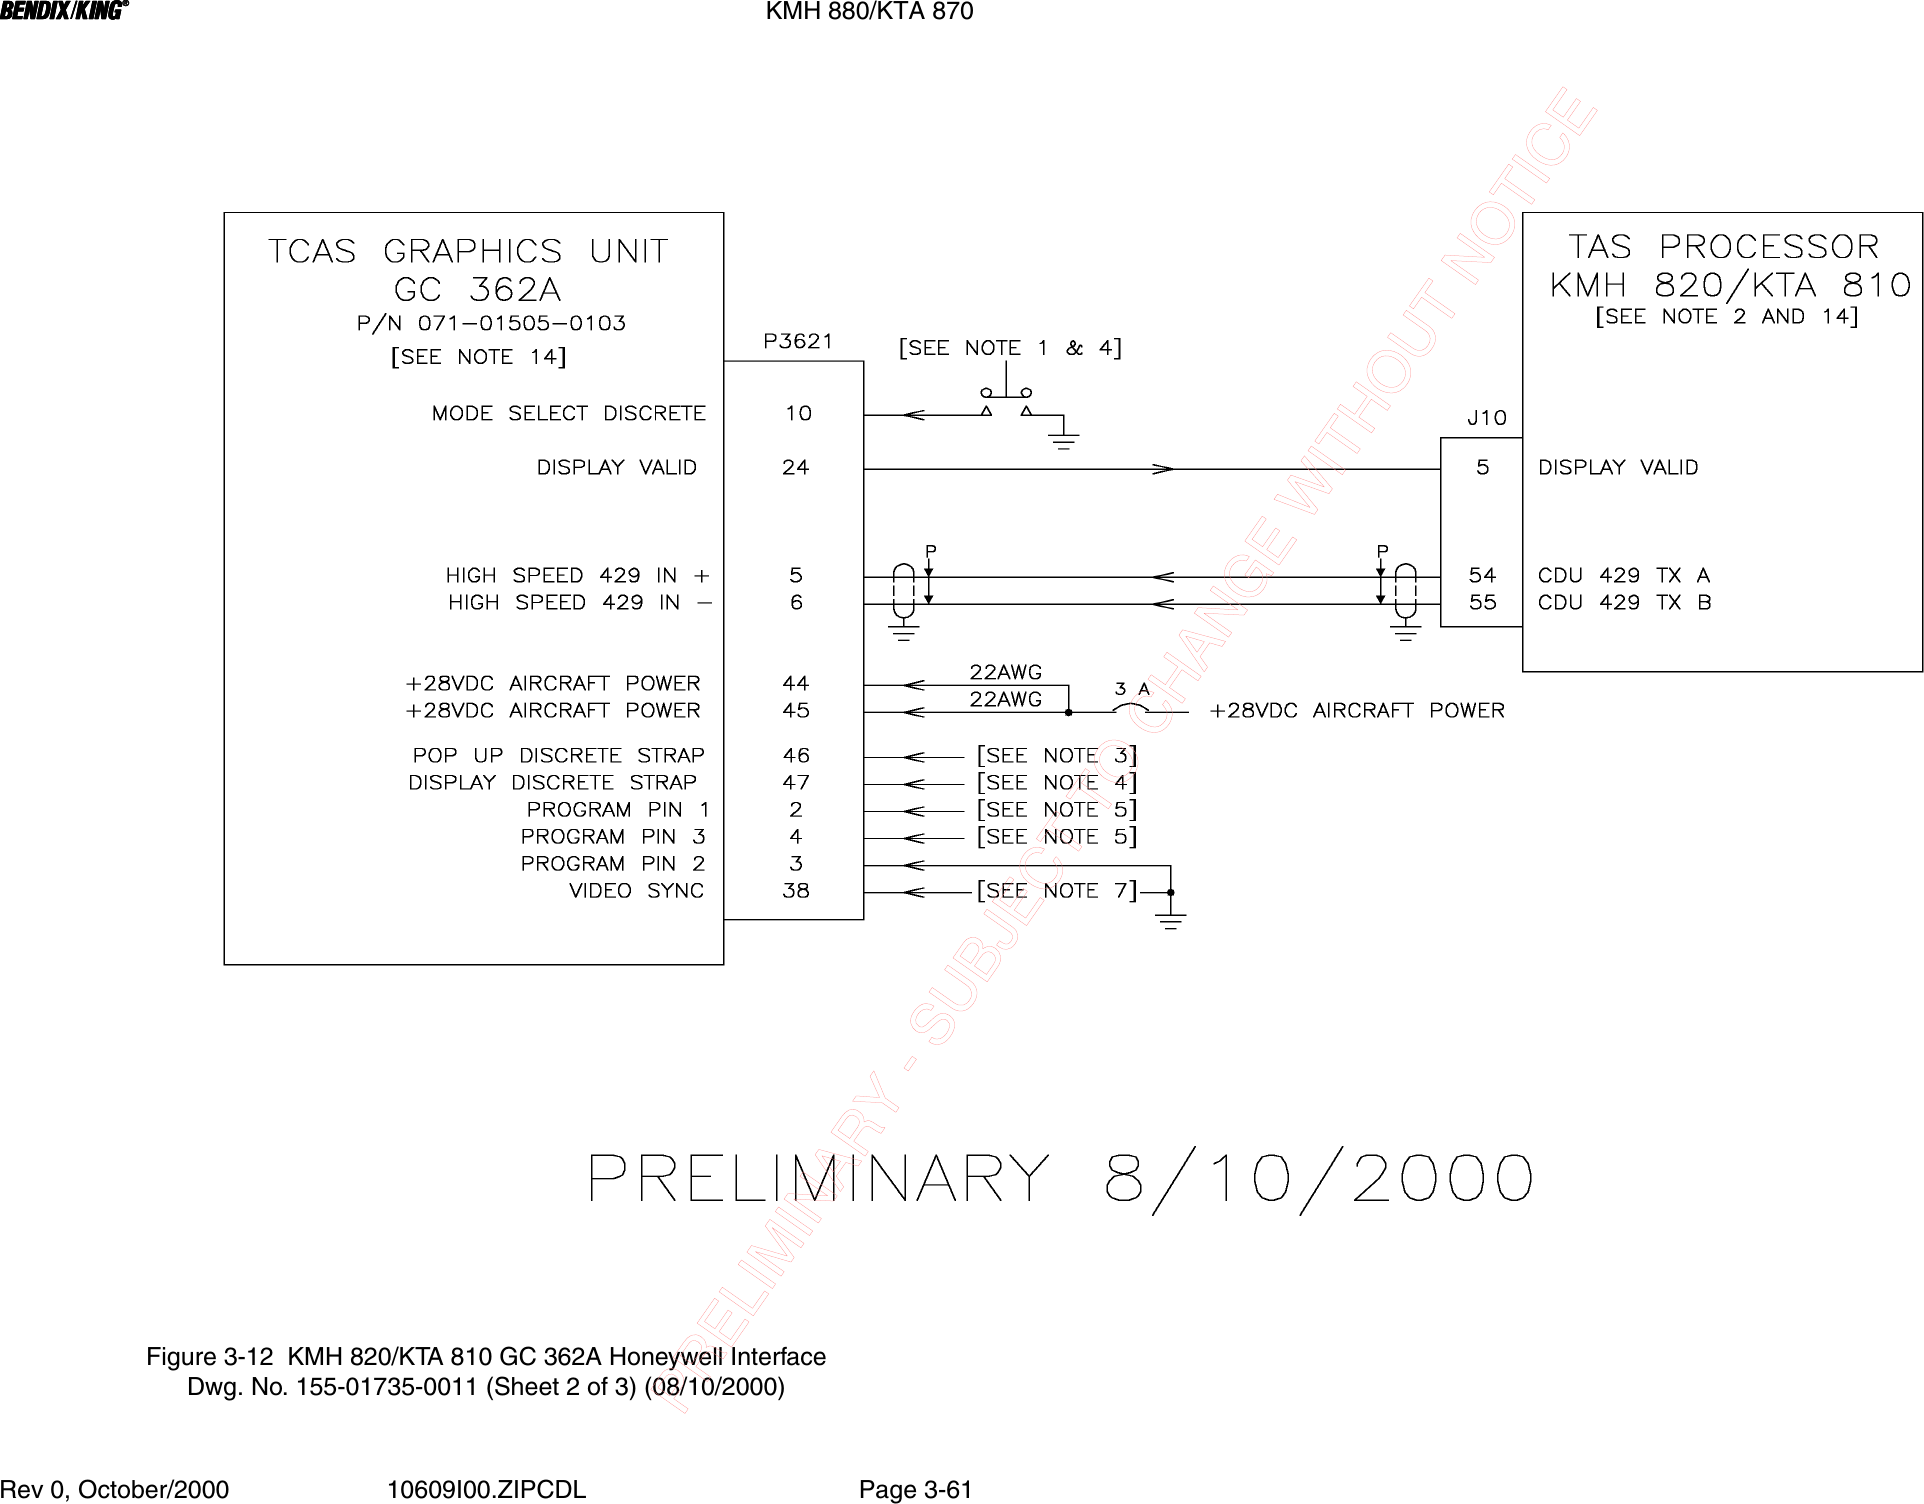 BBBBKMH 880/KTA 870Rev 0, October/2000 10609I00.ZIPCDL Page 3-61Figure 3-12  KMH 820/KTA 810 GC 362A Honeywell InterfaceDwg. No. 155-01735-0011 (Sheet 2 of 3) (08/10/2000)PRELIMINARY - SUBJECT TO CHANGE WITHOUT NOTICE